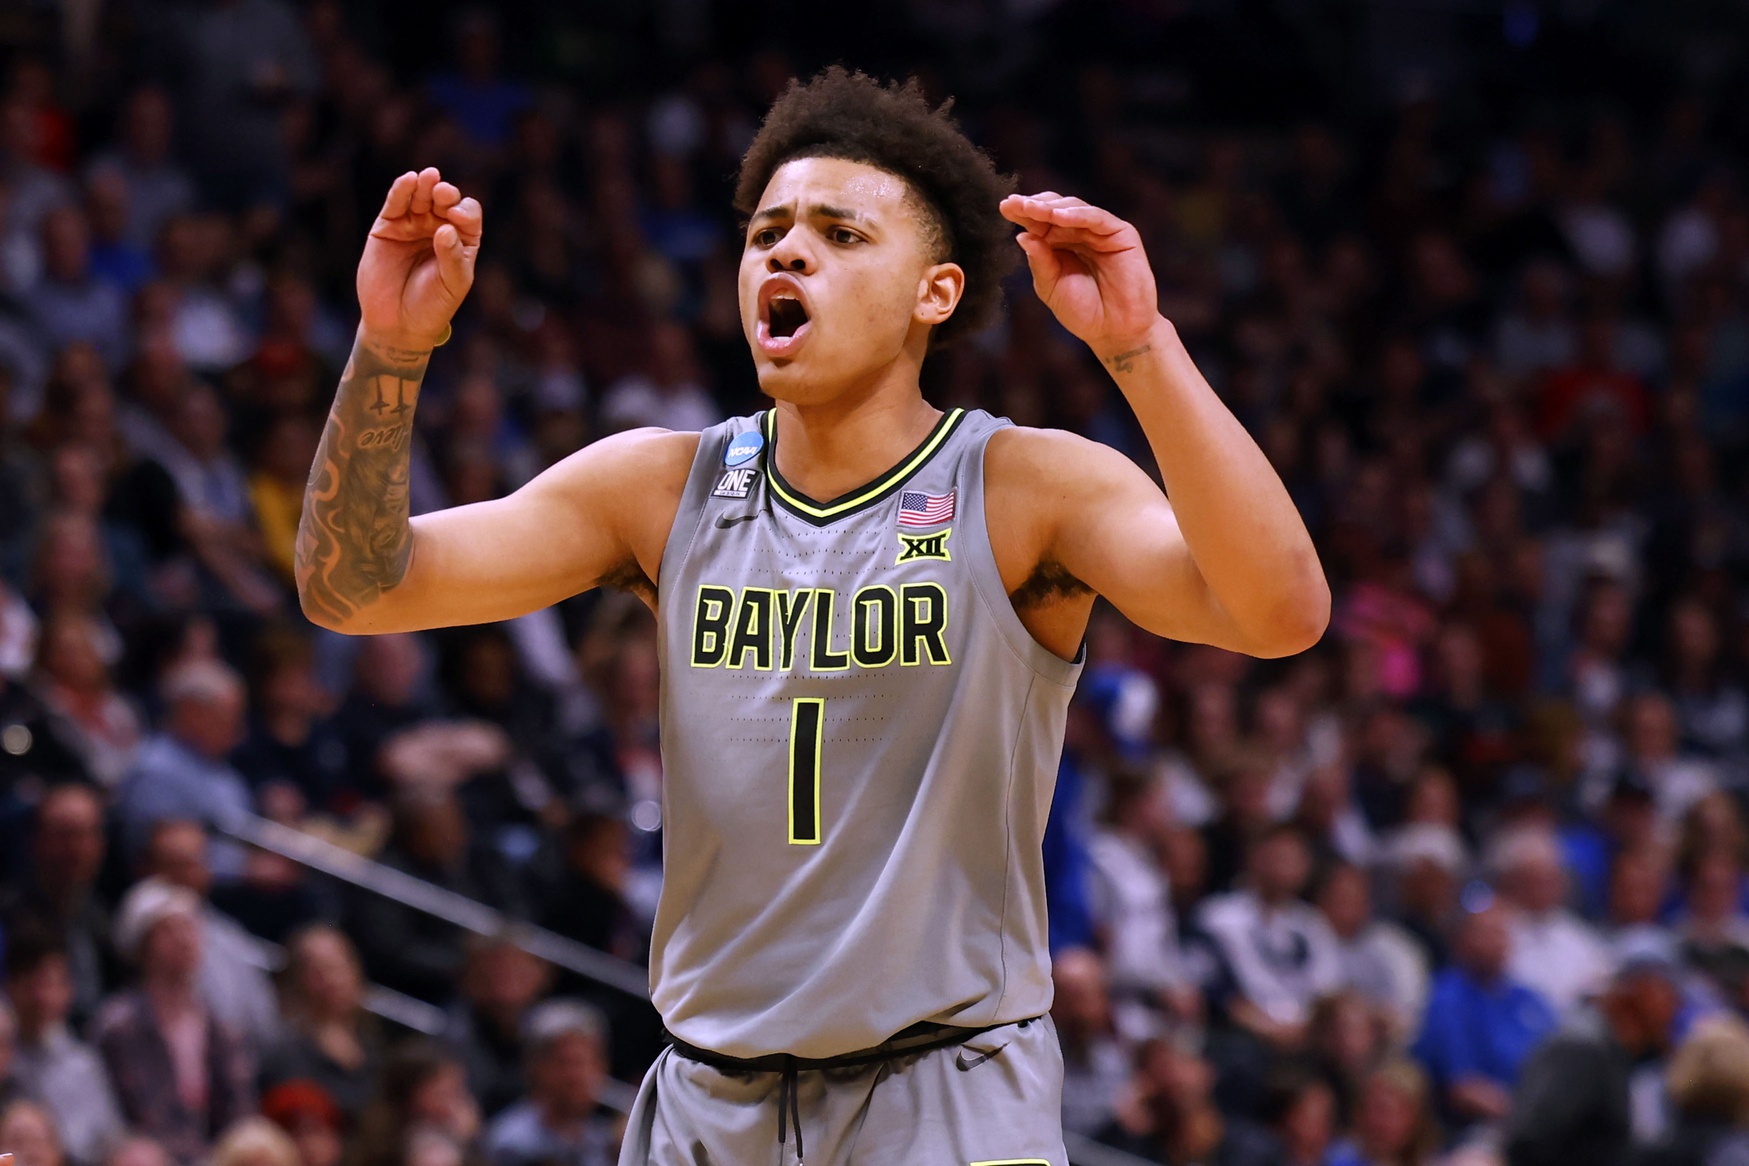 Mar 19, 2023; Denver, CO, USA; Baylor Bears guard Keyonte George (1) reacts in the second half against the Creighton Bluejays at Ball Arena. Will the Utah Jazz sraft him in the first round?Mandatory Credit: Michael Ciaglo-USA TODAY Sports